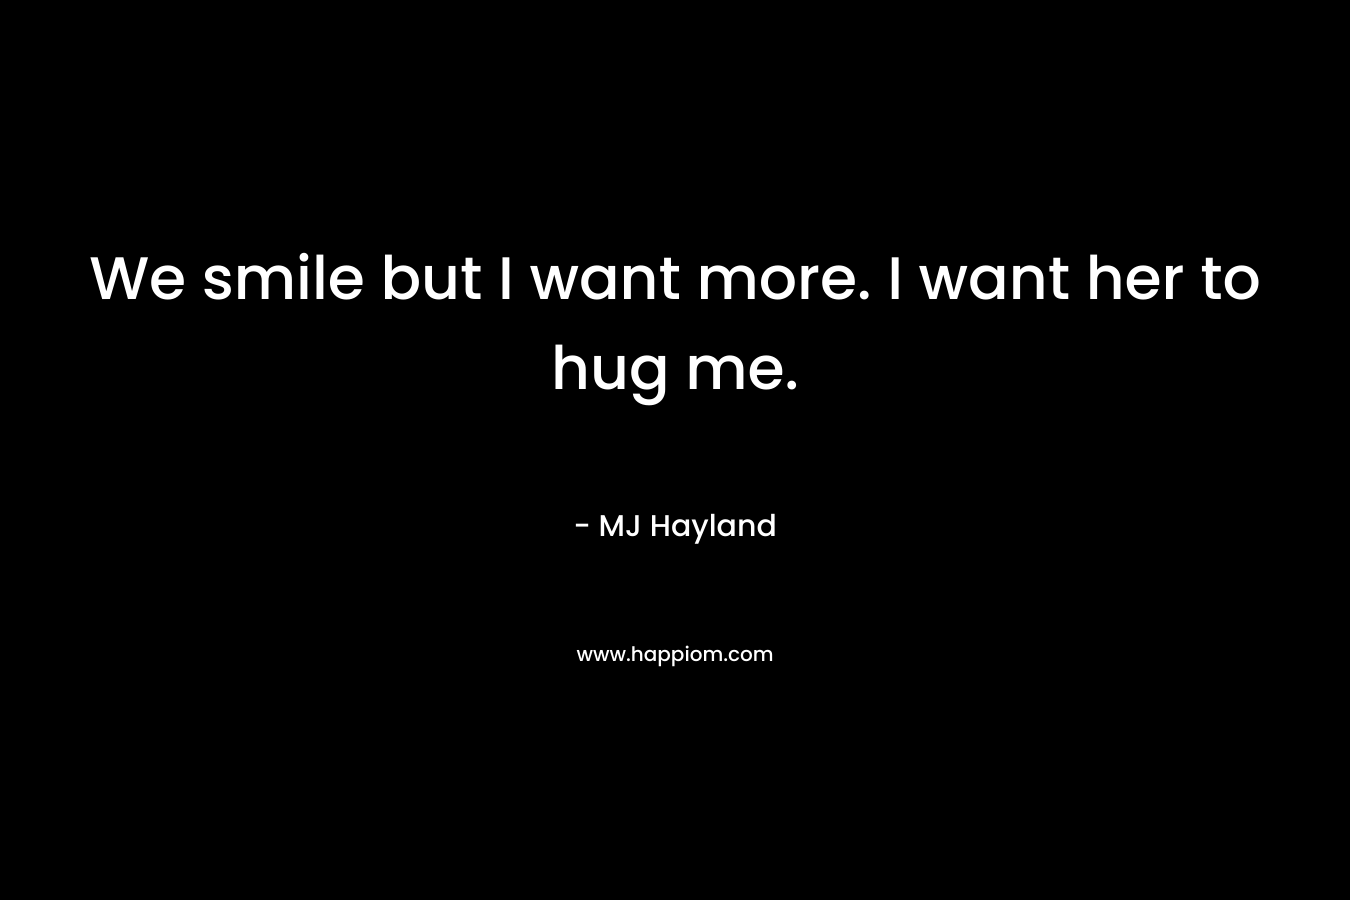 We smile but I want more. I want her to hug me. – MJ Hayland